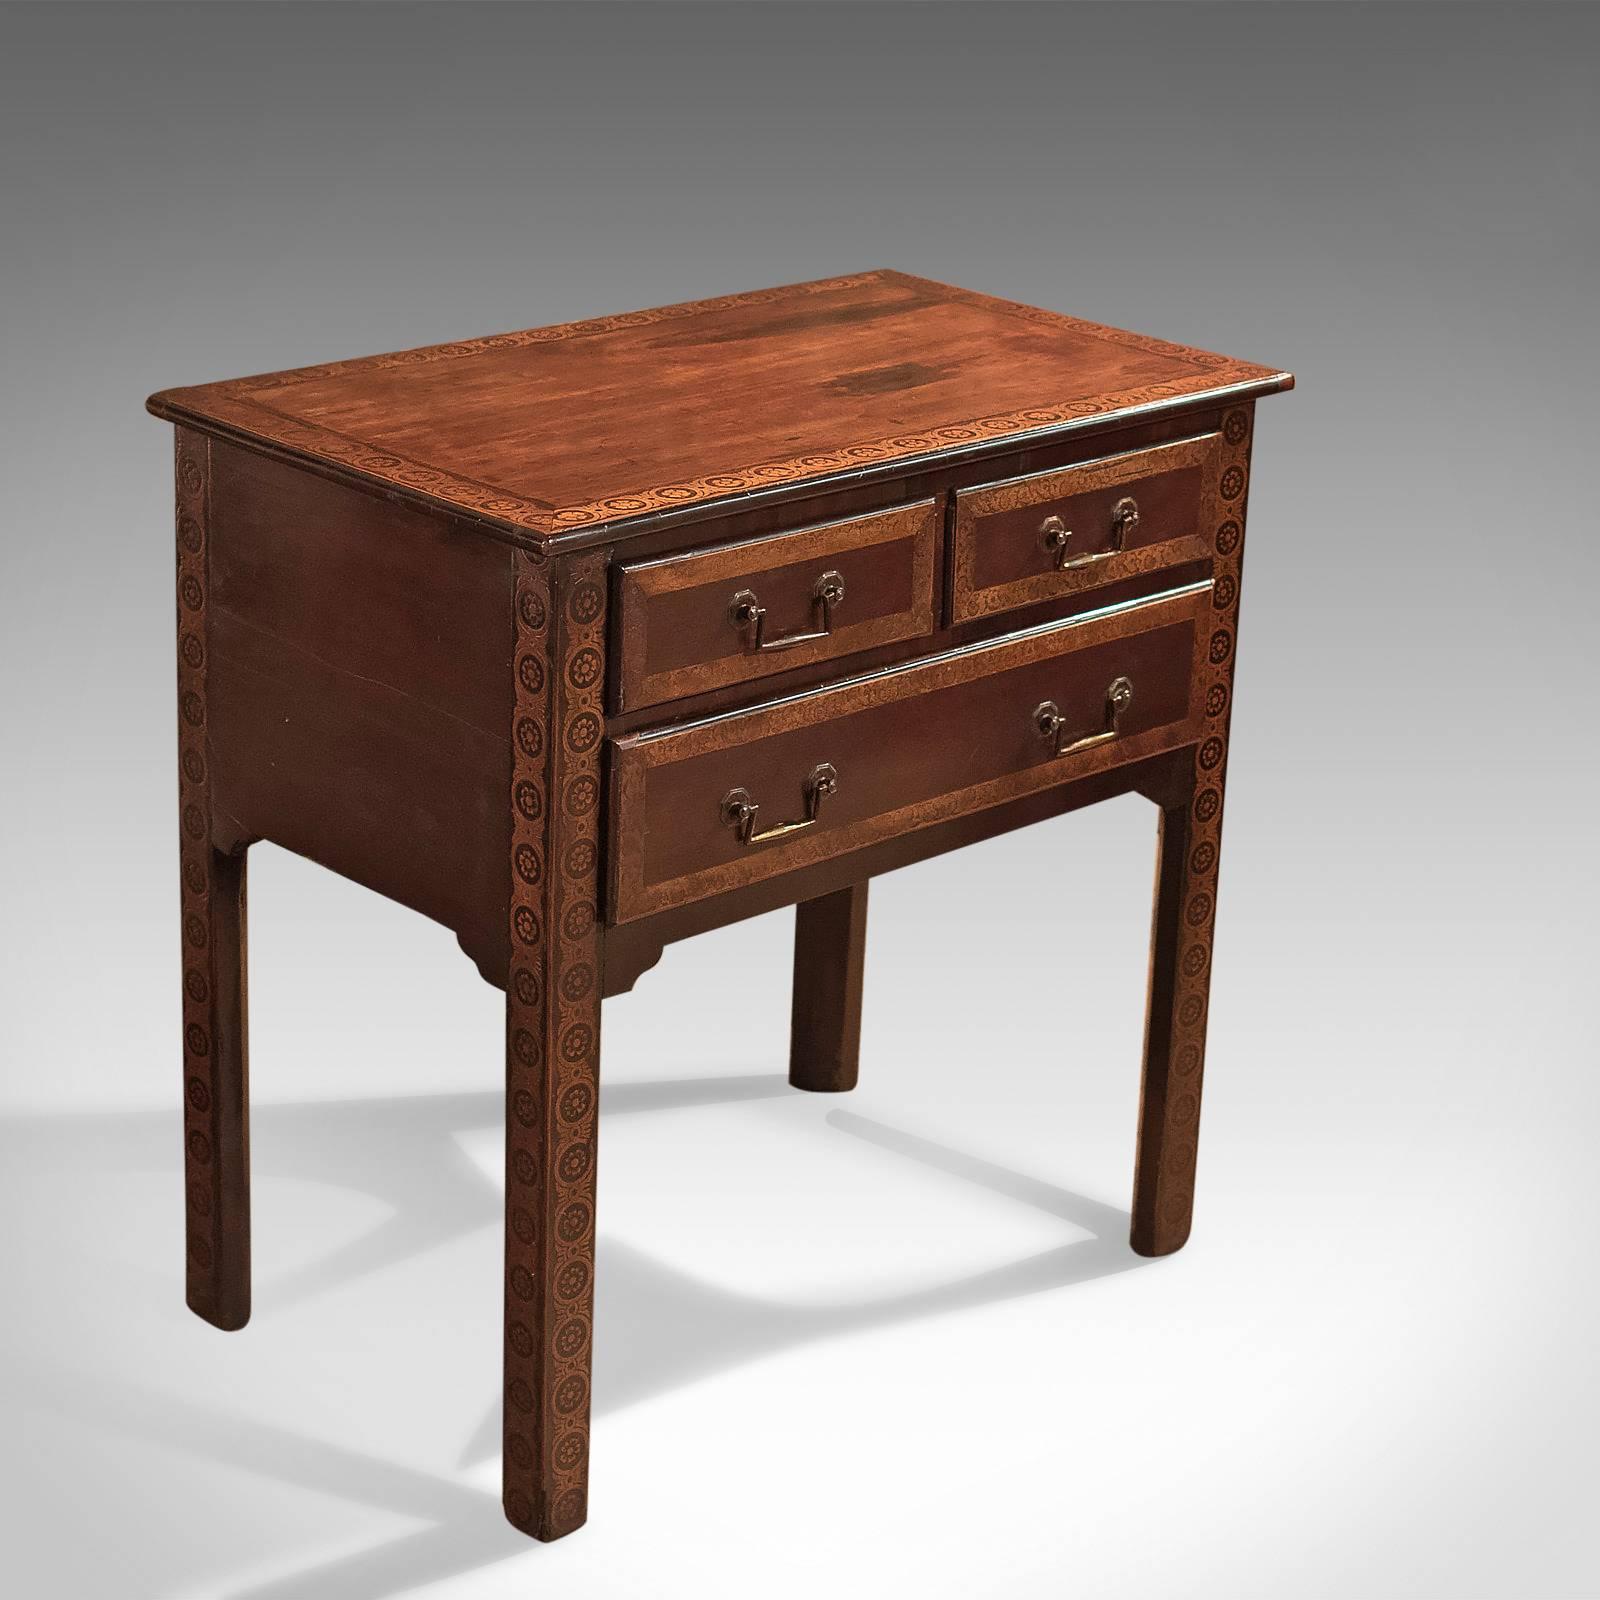 This is an appealing antique lowboy dating to the early 18th century, circa 1720.

Mahogany with an aged patina and contrasting decoration
Raised on stout, straight square section legs with chamfered inner corners
Legs and top decorated with